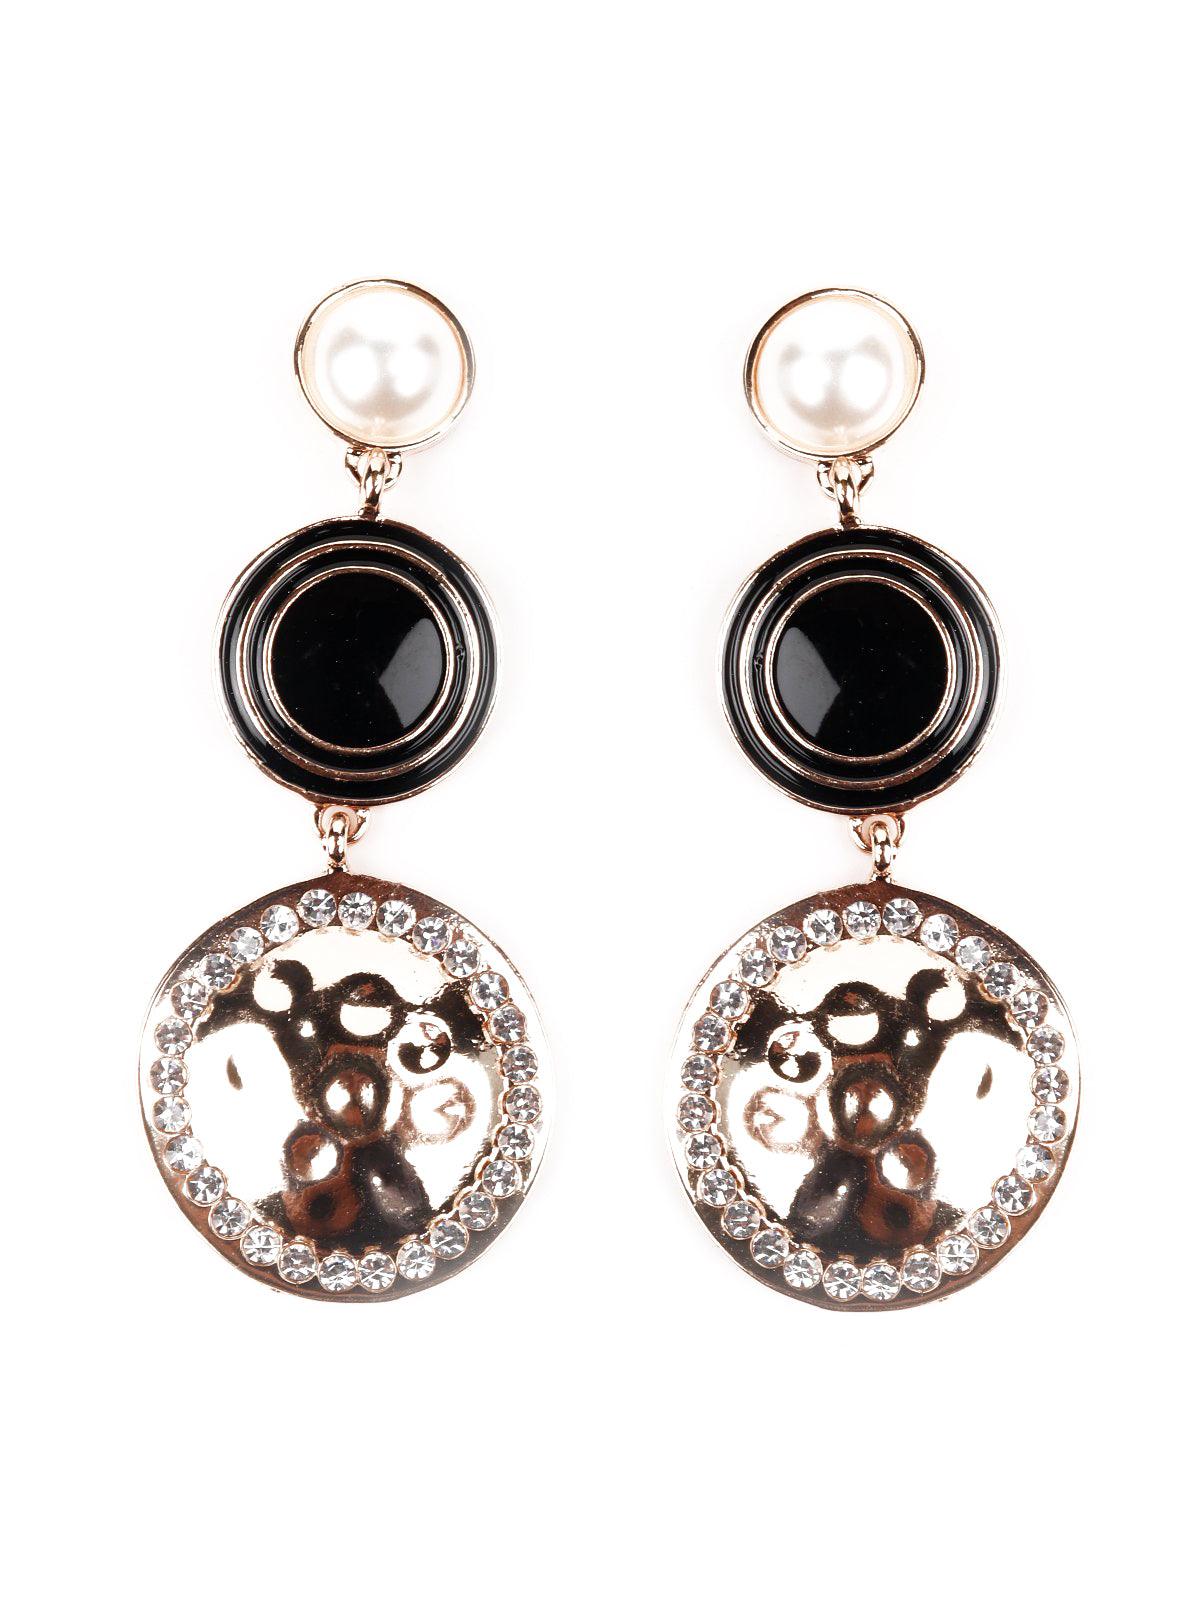 Spherical Pearl And Crystal Embellished Earrings - Odette